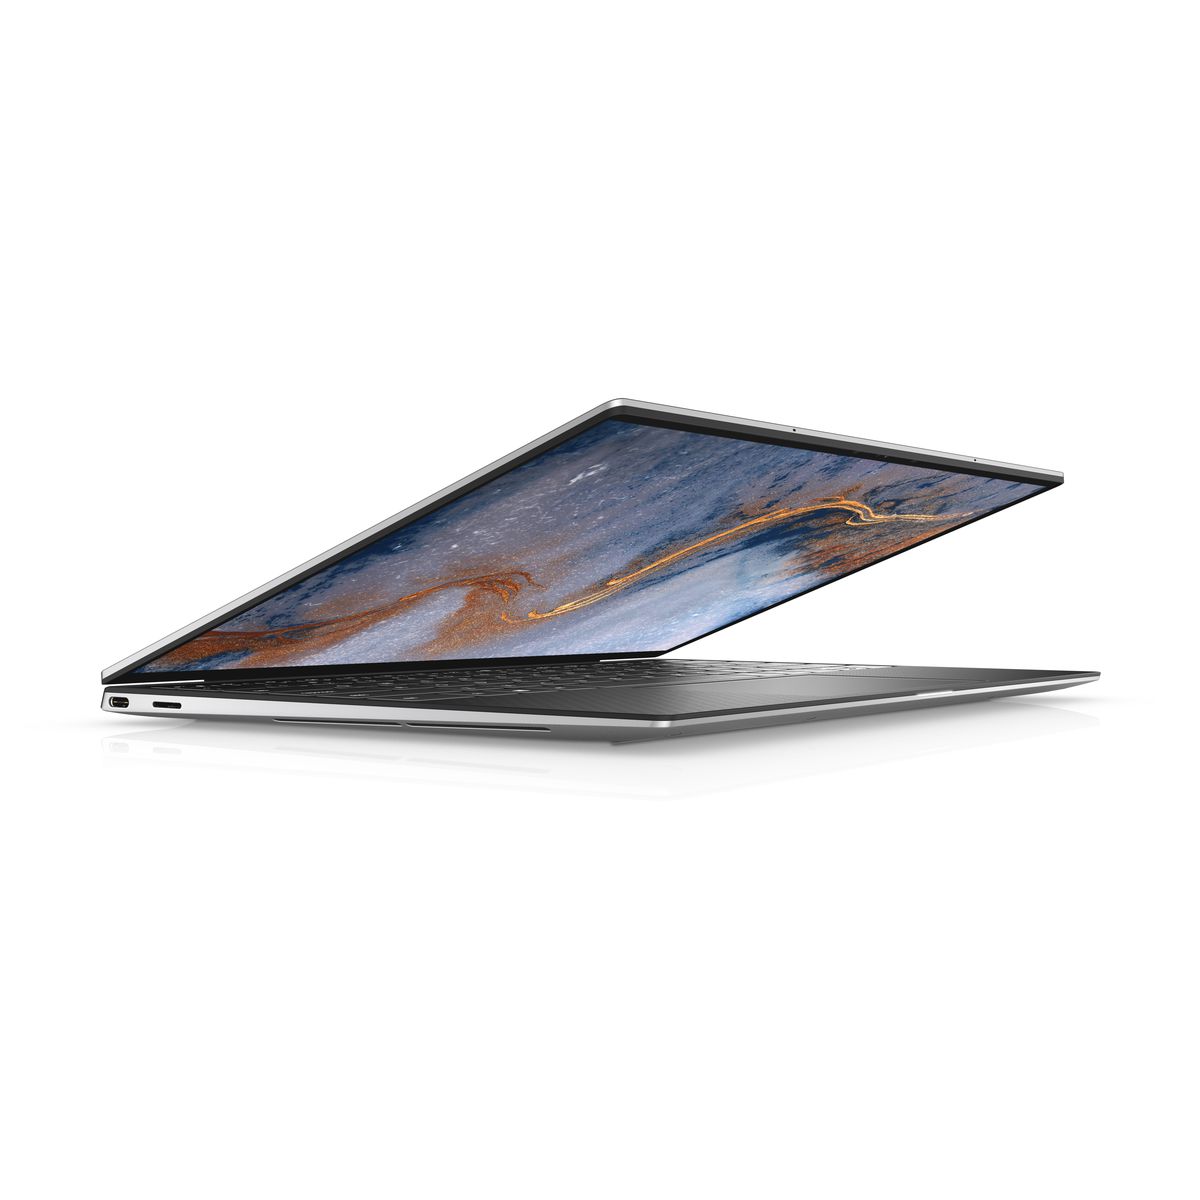 The Dell XPS 13 seen from the left side, half open.